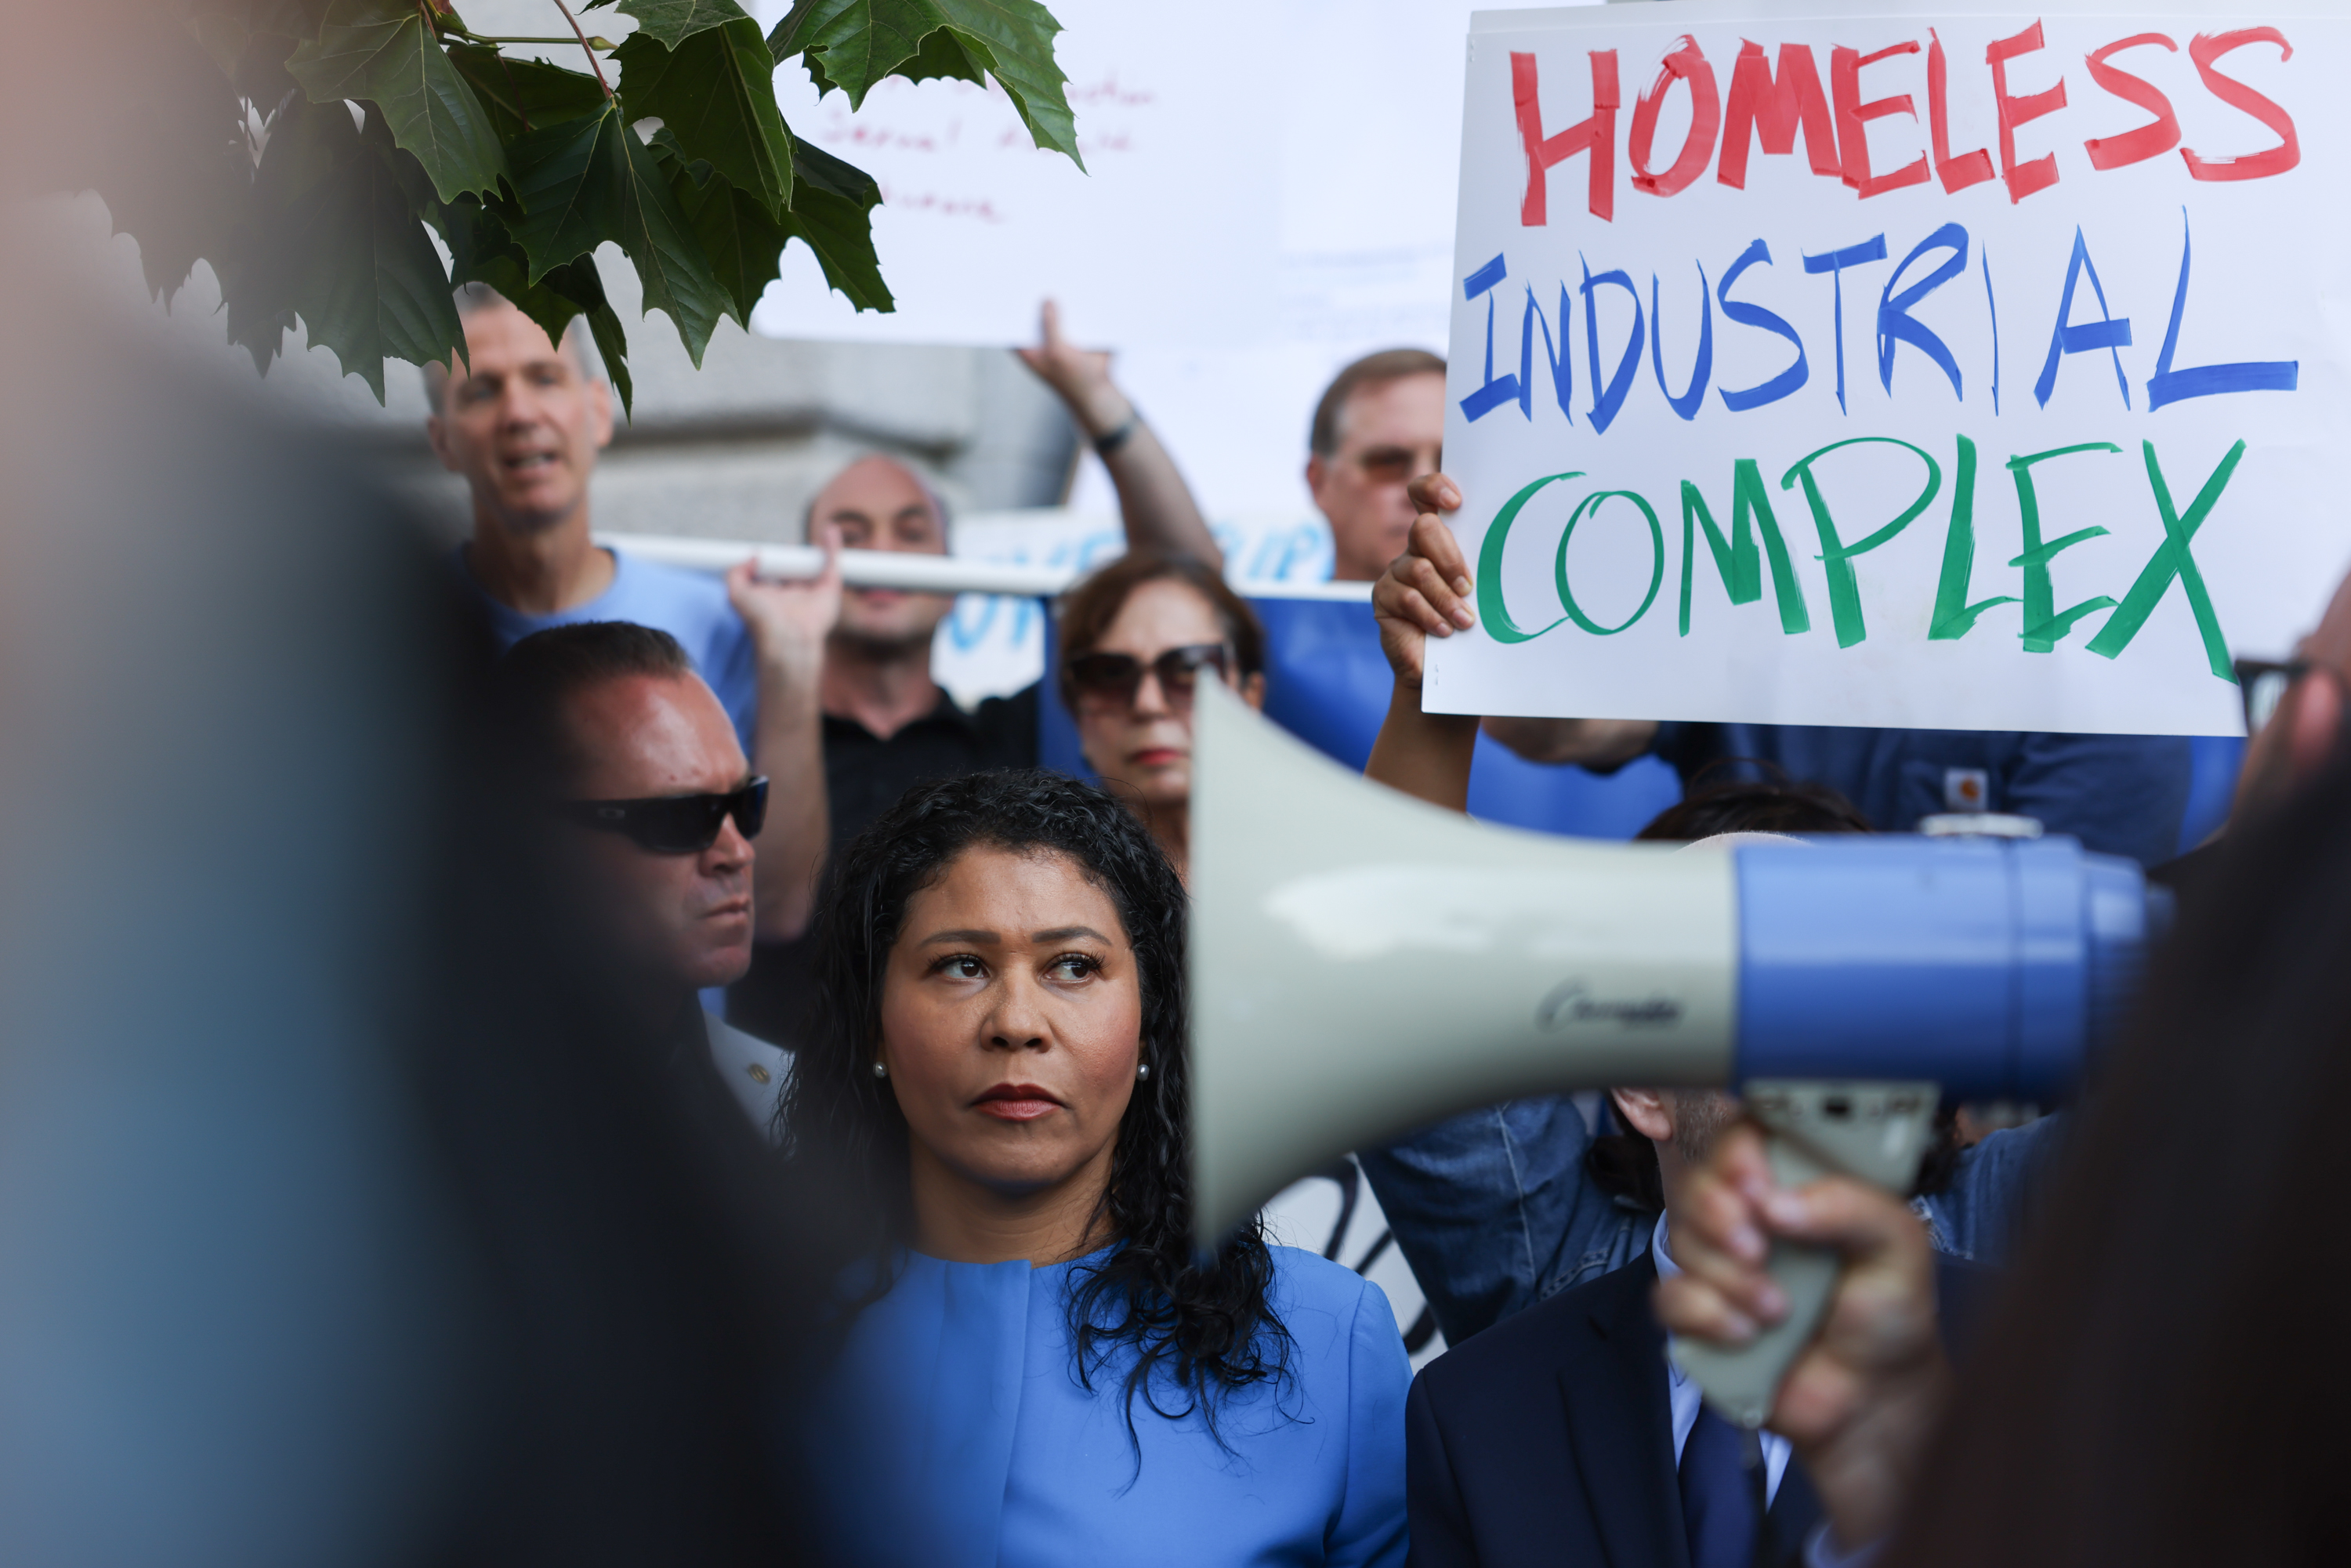 A woman with a megaphone is in focus with protesters and a "HOMELESS INDUSTRIAL COMPLEX" sign in the background.